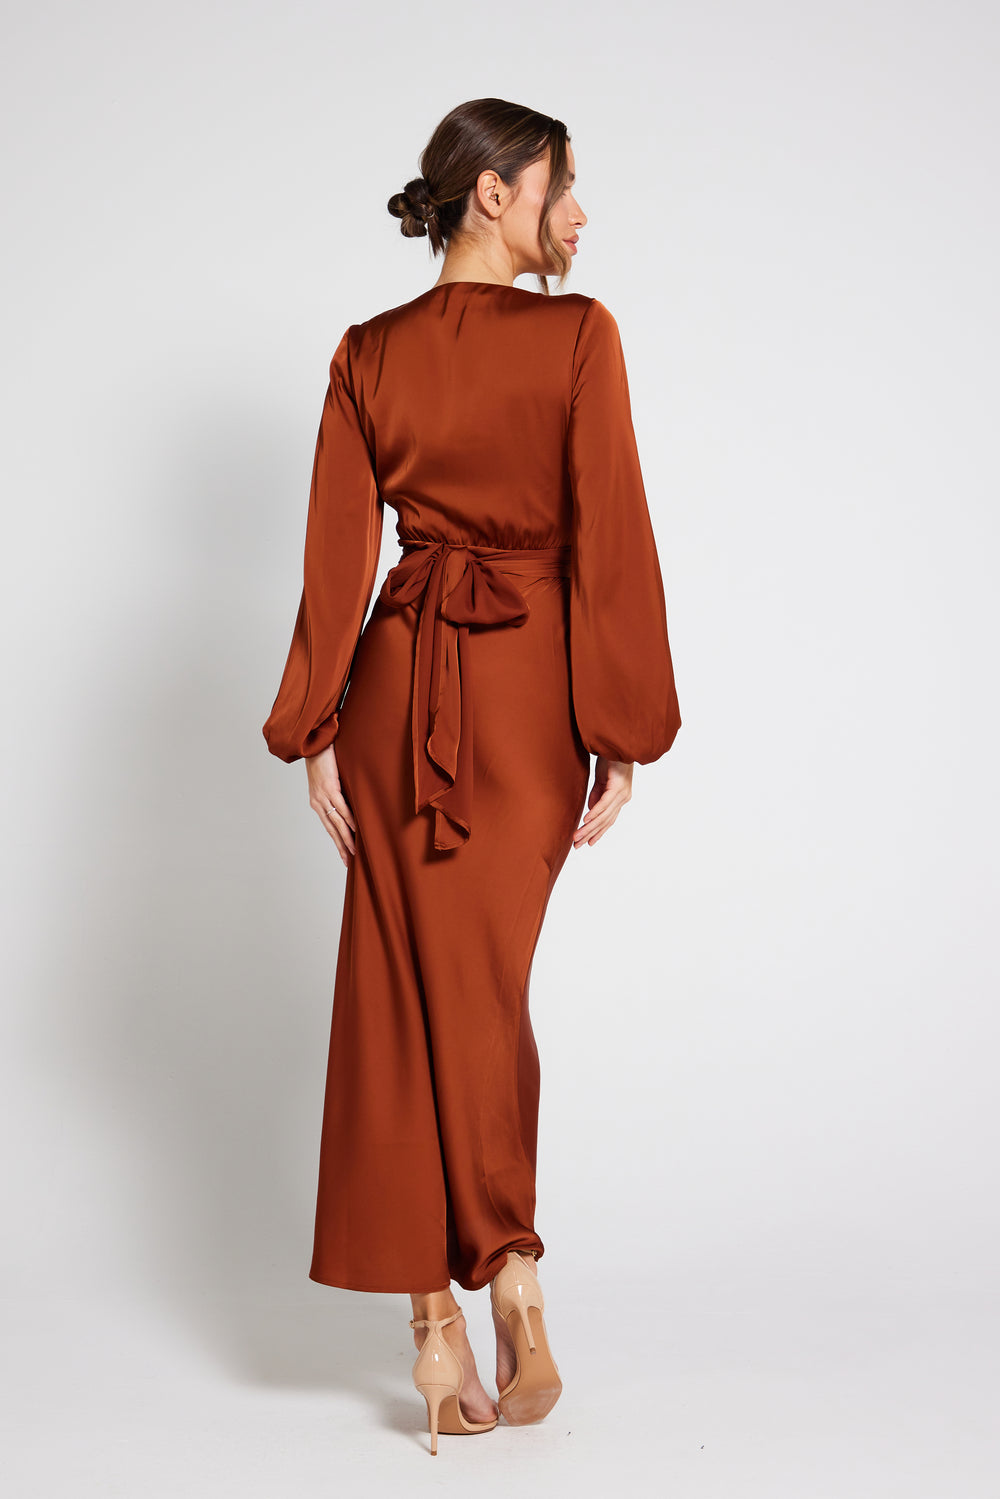 Pippa Long Sleeve Satin Maxi Dress in Rust | Luxe Collection Dresses ...